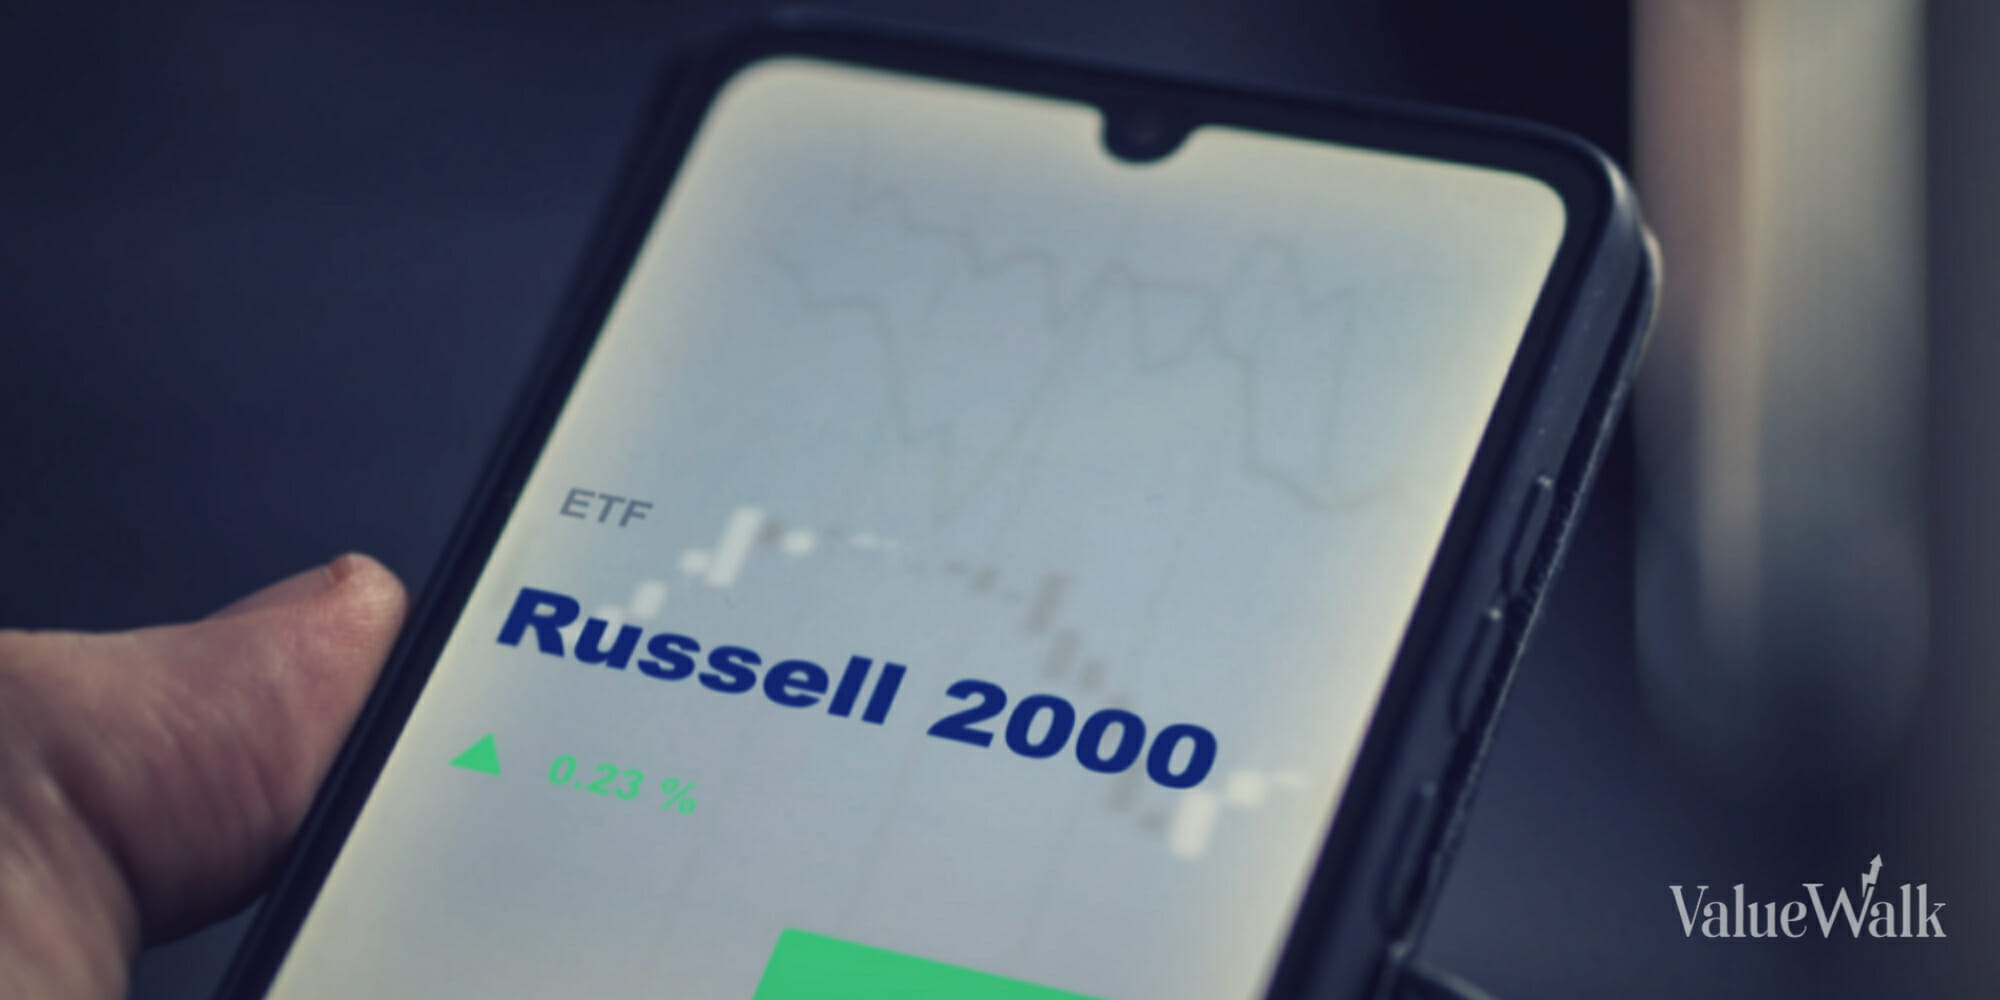 Russell 2000 to Play Catch-up